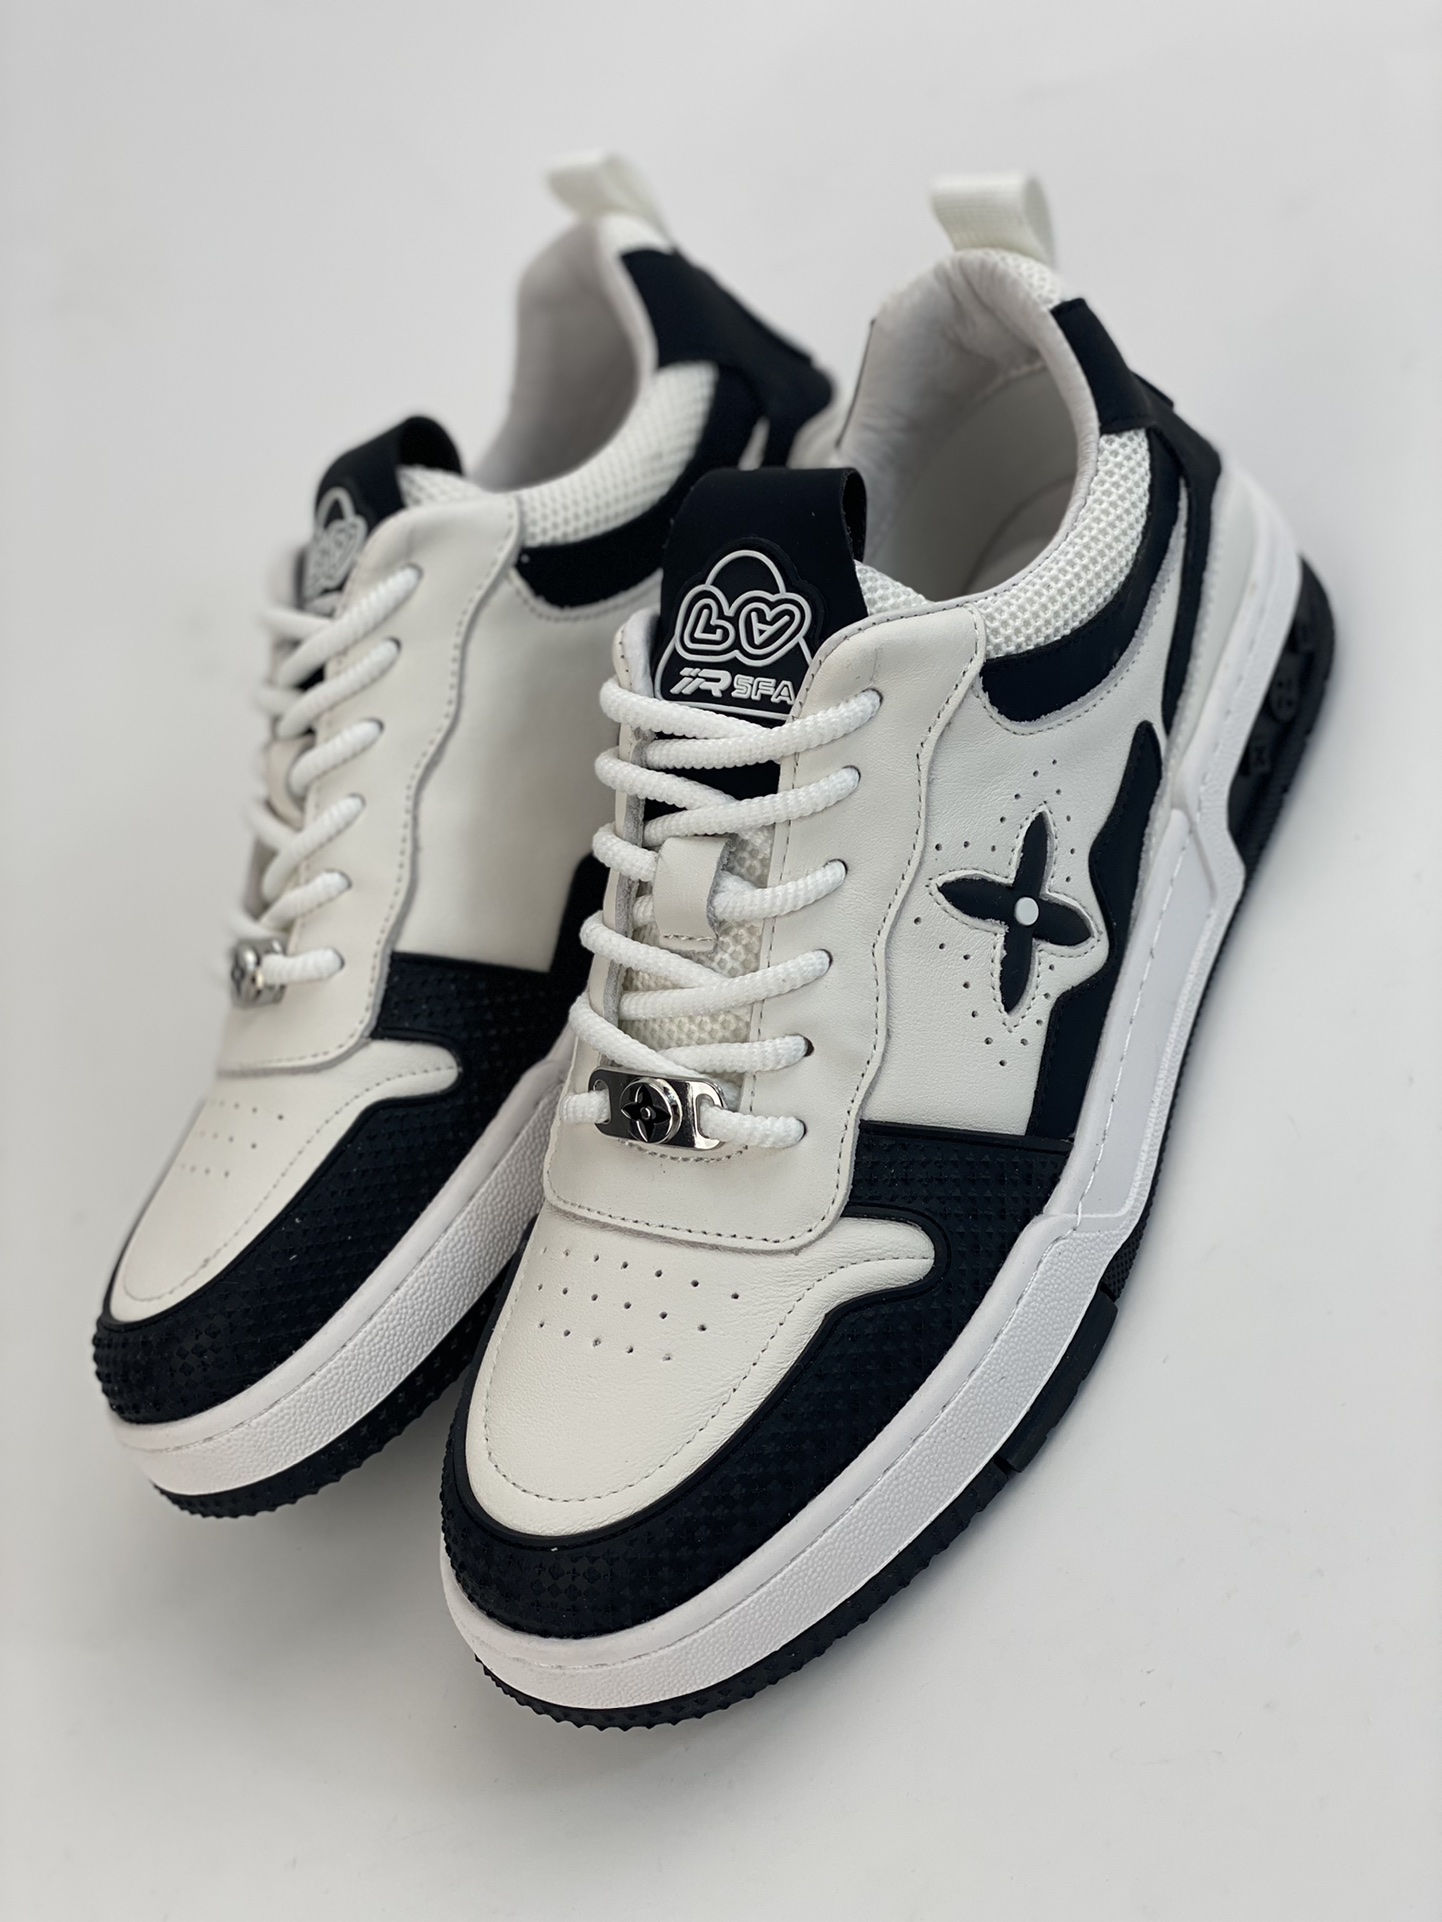 LV 23ss Trainer Sneaker casual sports shoes